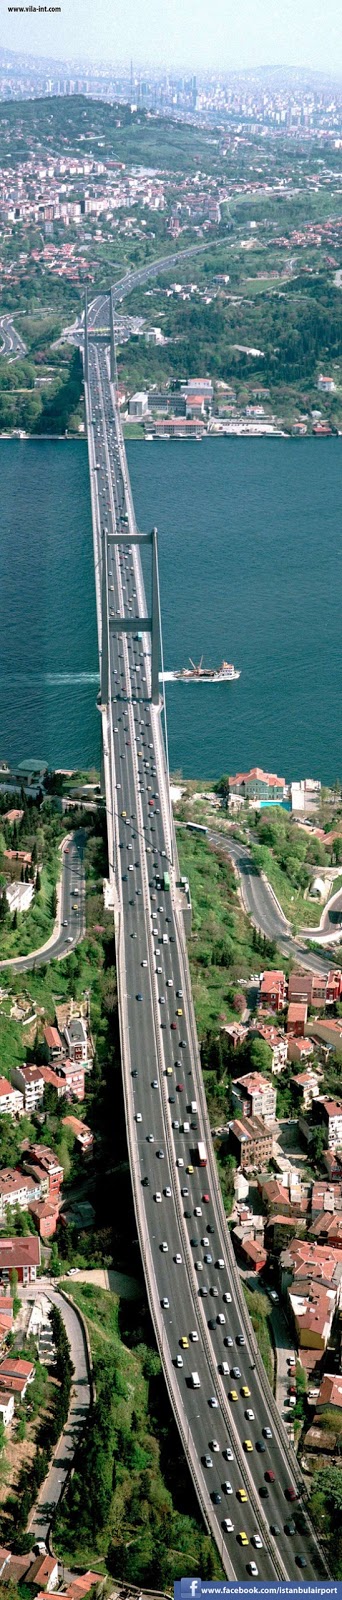 Bosphorus Bridge Istanbul. It is 1,510 m (4,954 ft) long with a deck width of 39 m (128 ft). The distance between the towers (main span) is 1,074 m (3,524 ft) and their height over road level is 105 m (344 ft)